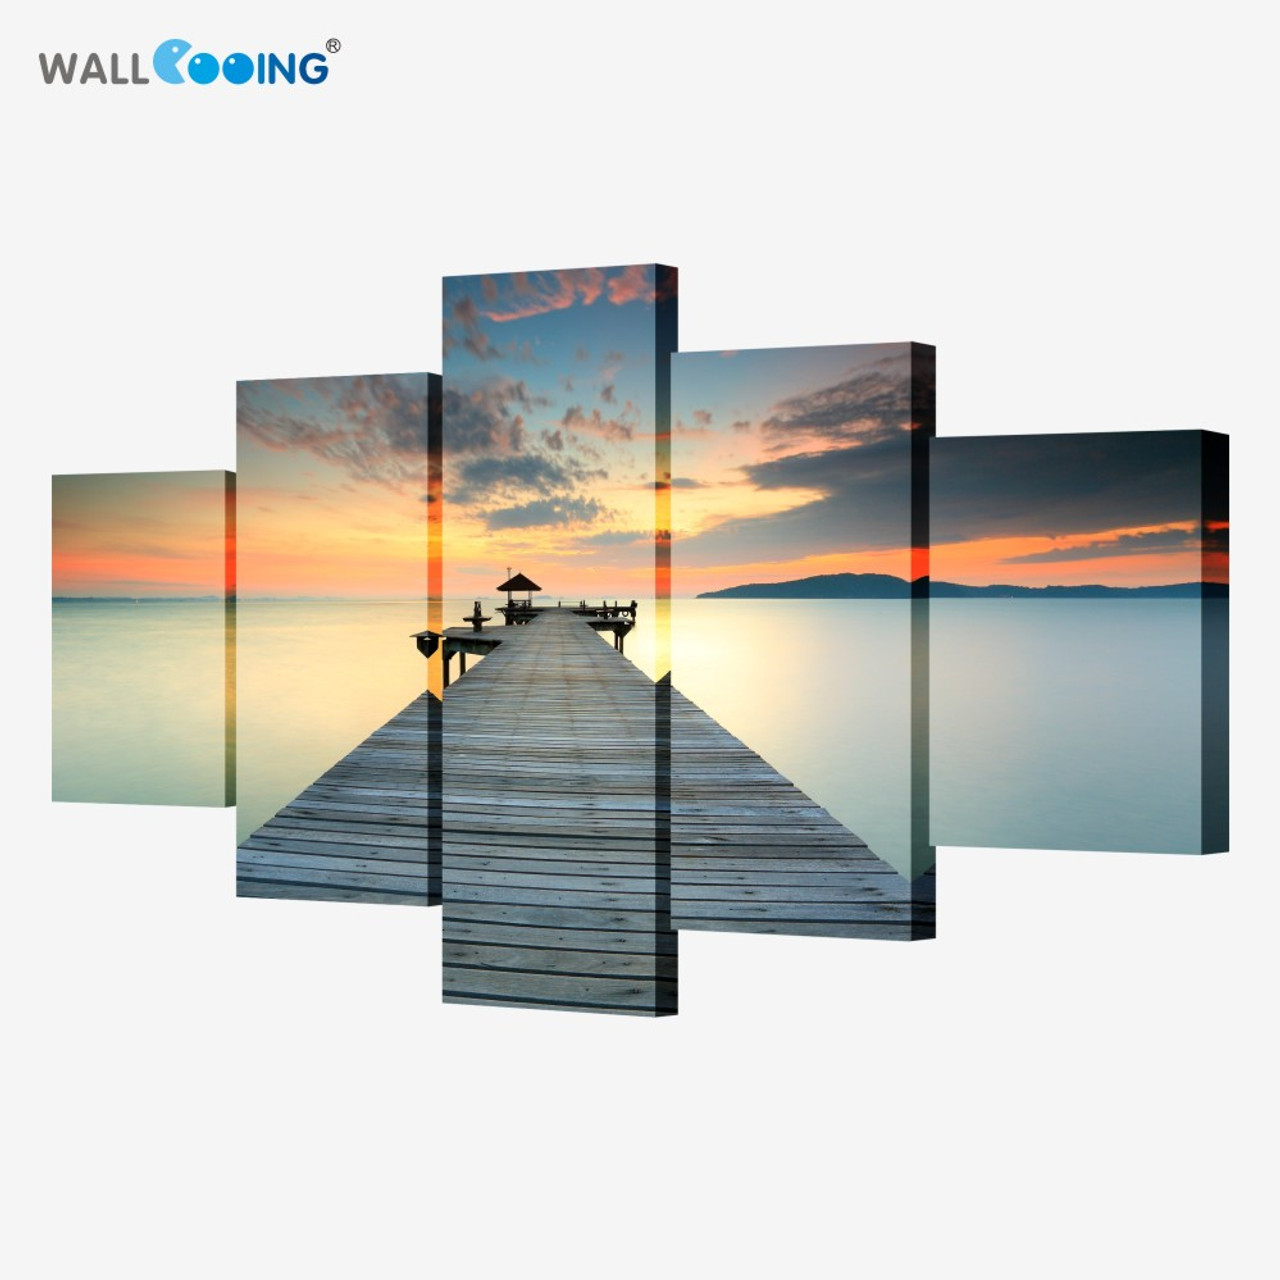 5 Piece The Sunset Wall Art Dusk Pier Decorative Canvas Painting The Living Room Sofa Bedroom Flowers Canvas No Frame